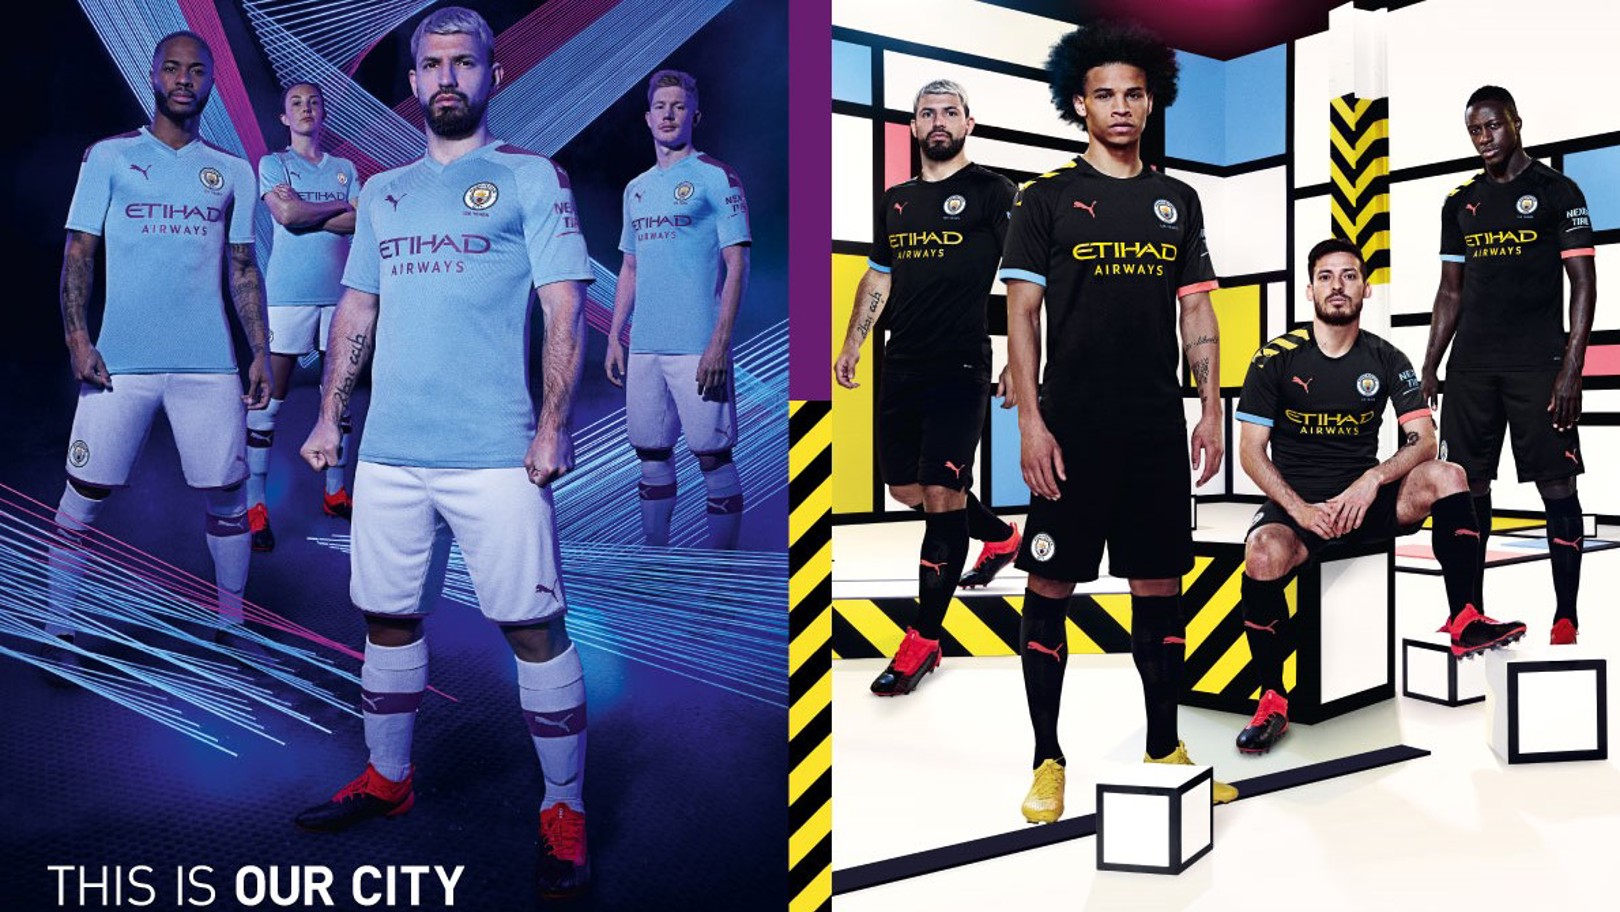 PUMA City kits pay tribute to Manchester heritage